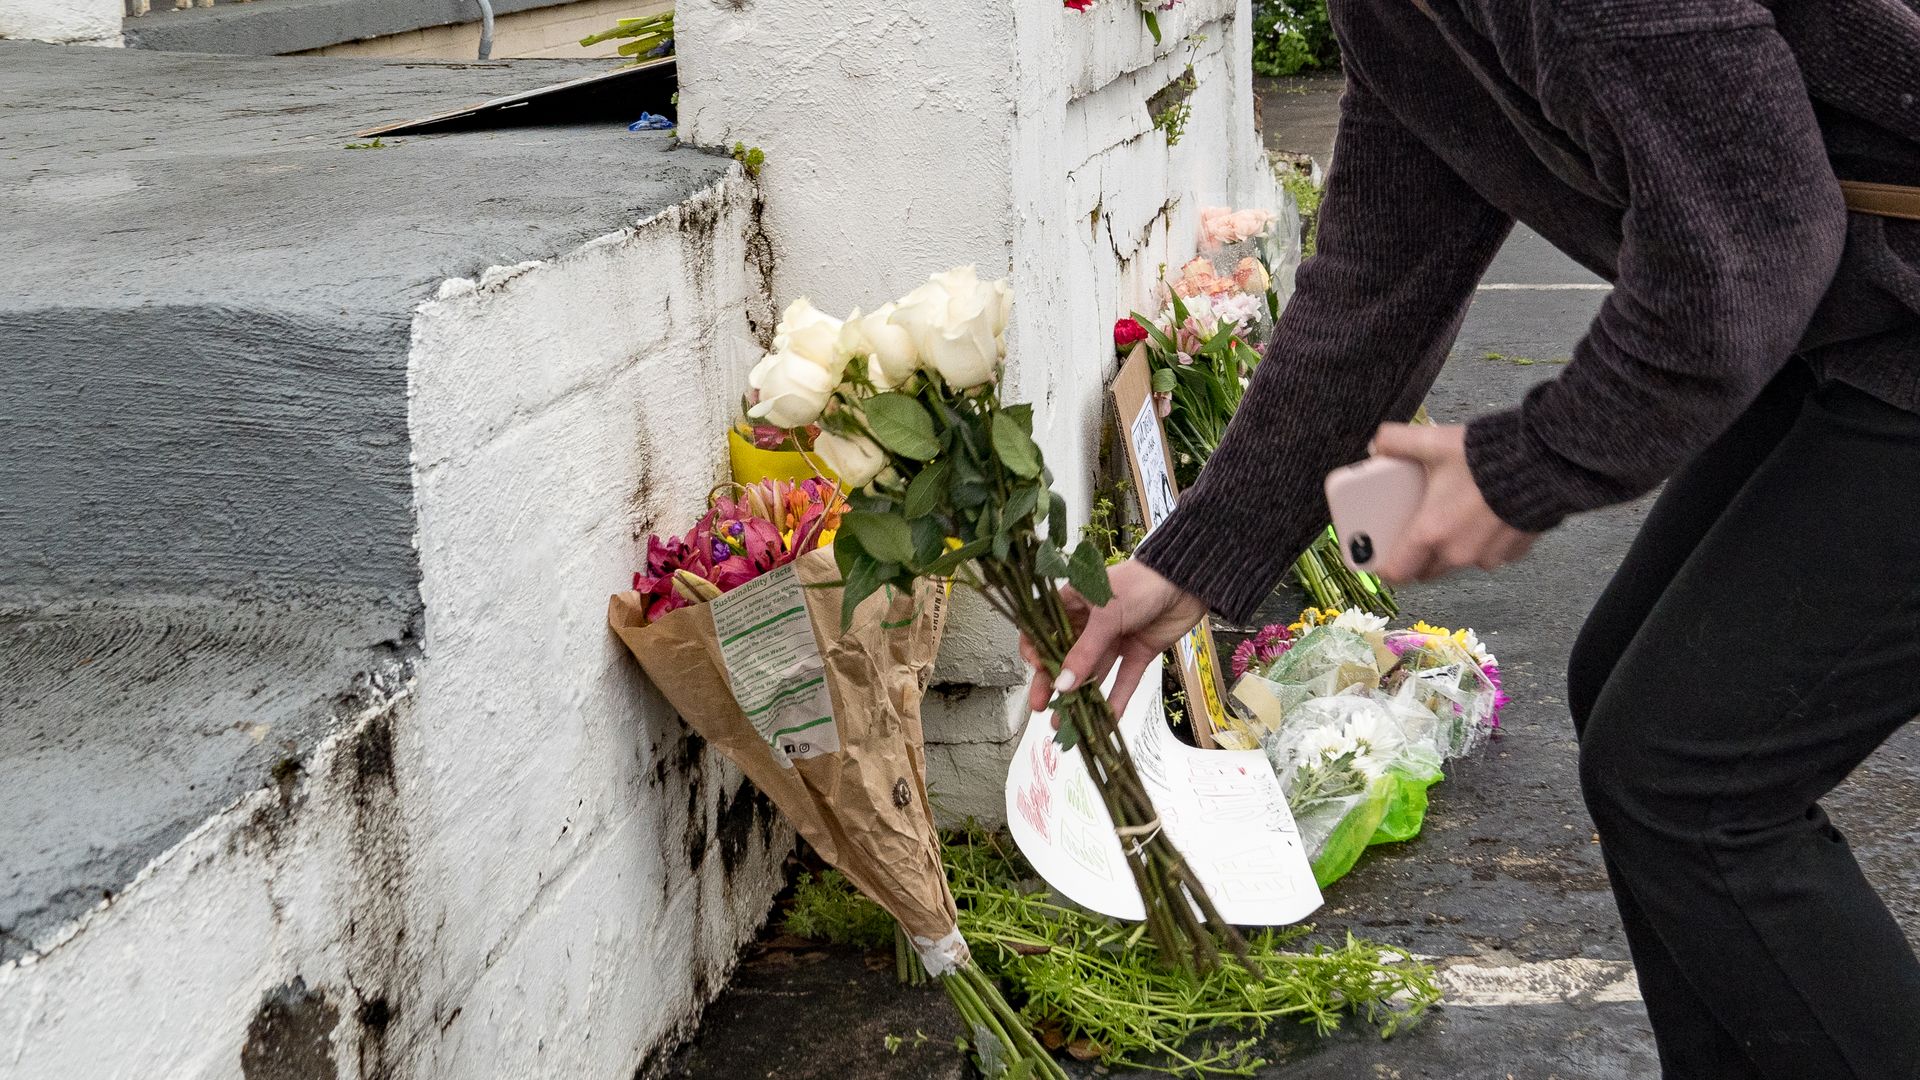 Mourners leave flowers for the victims of the Georgia shooting. Photo: Megan Varner/Getty Images